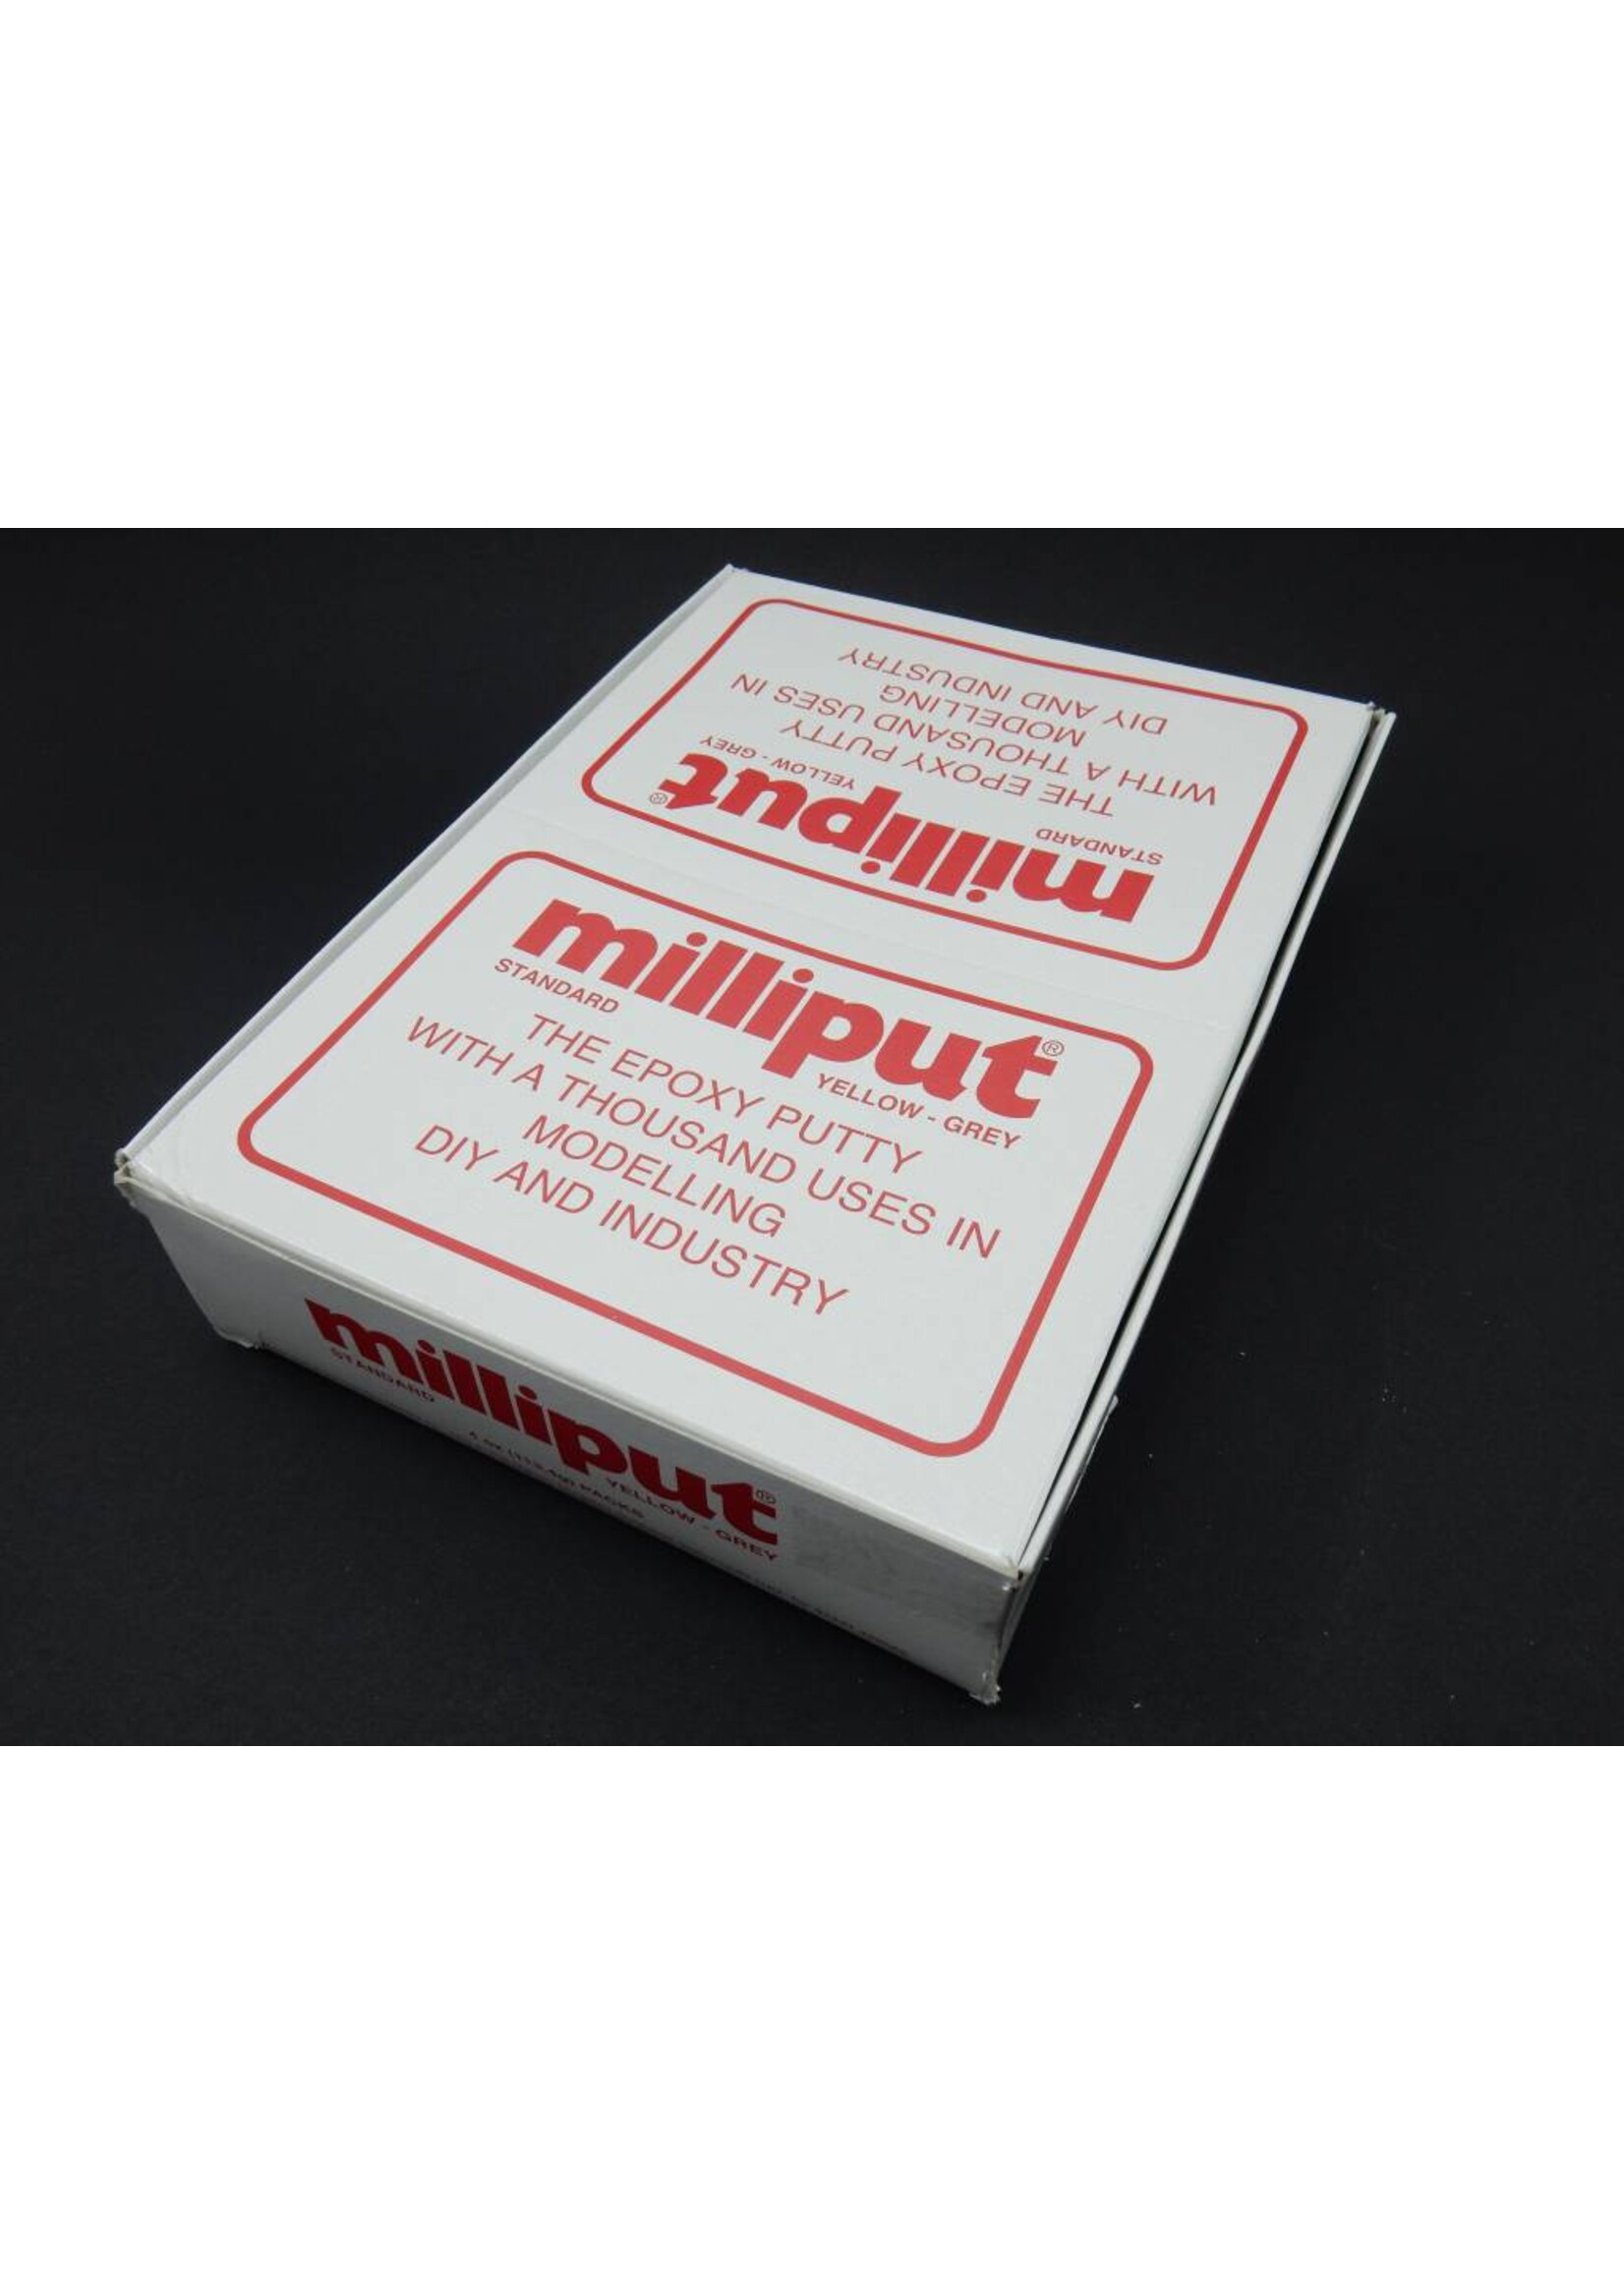 Standard Yellow-Grey Milliput - For repairing water and fuel systems,  filling dents, modelmaking and much more.